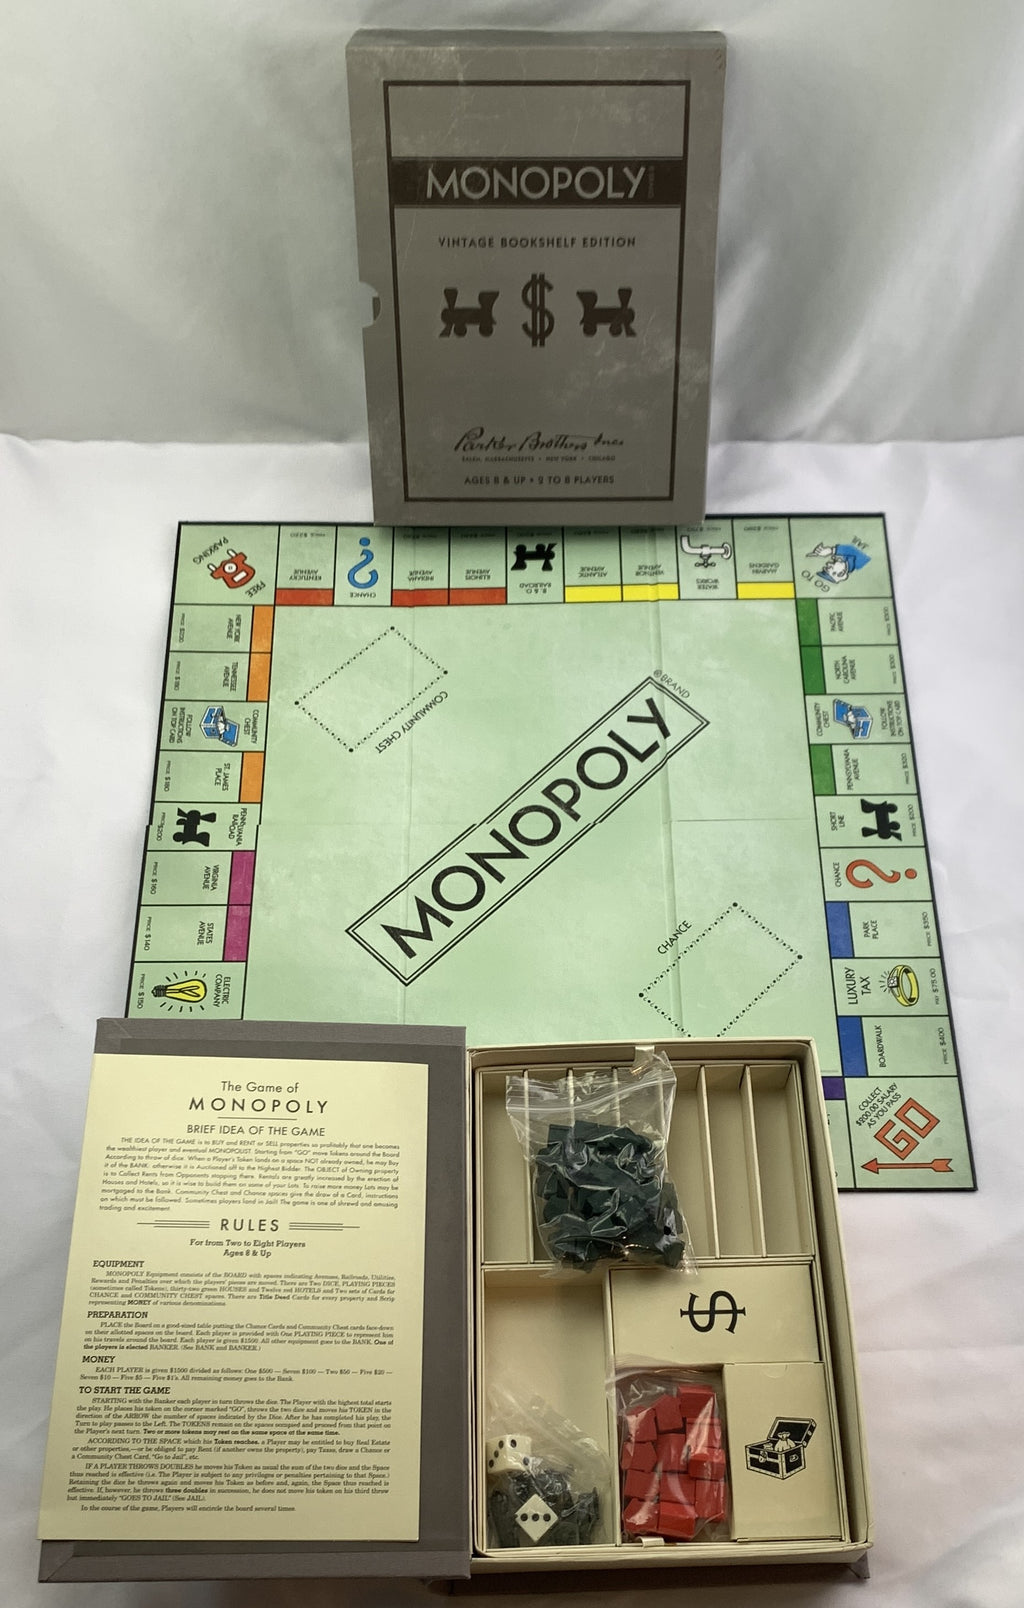 Monopoly Board Game Vintage Edition Linen Box - 2015 - Winning Solutions - Never Played